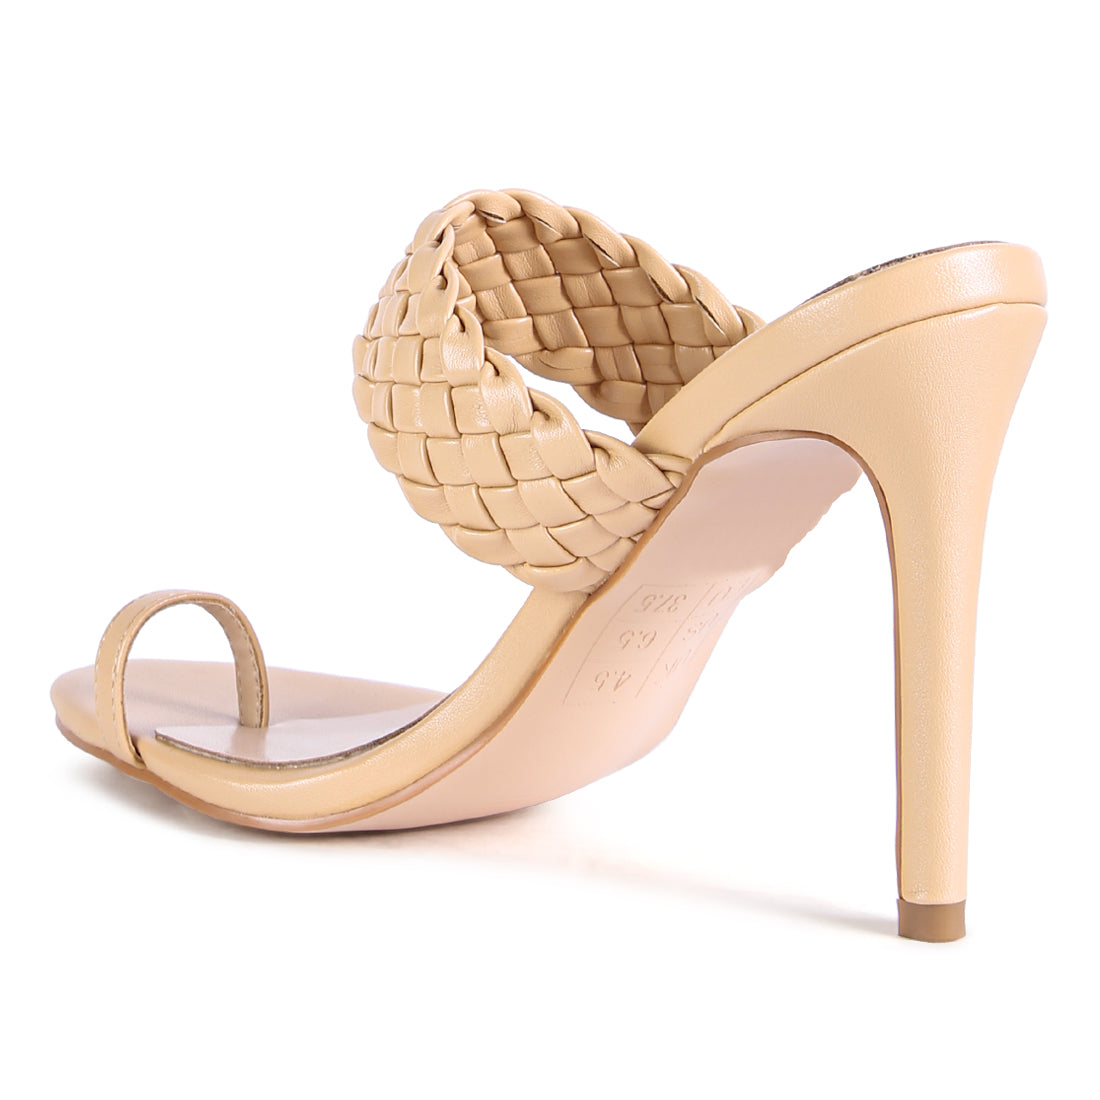 Woven Strap Toe Ring Sandals in Beige